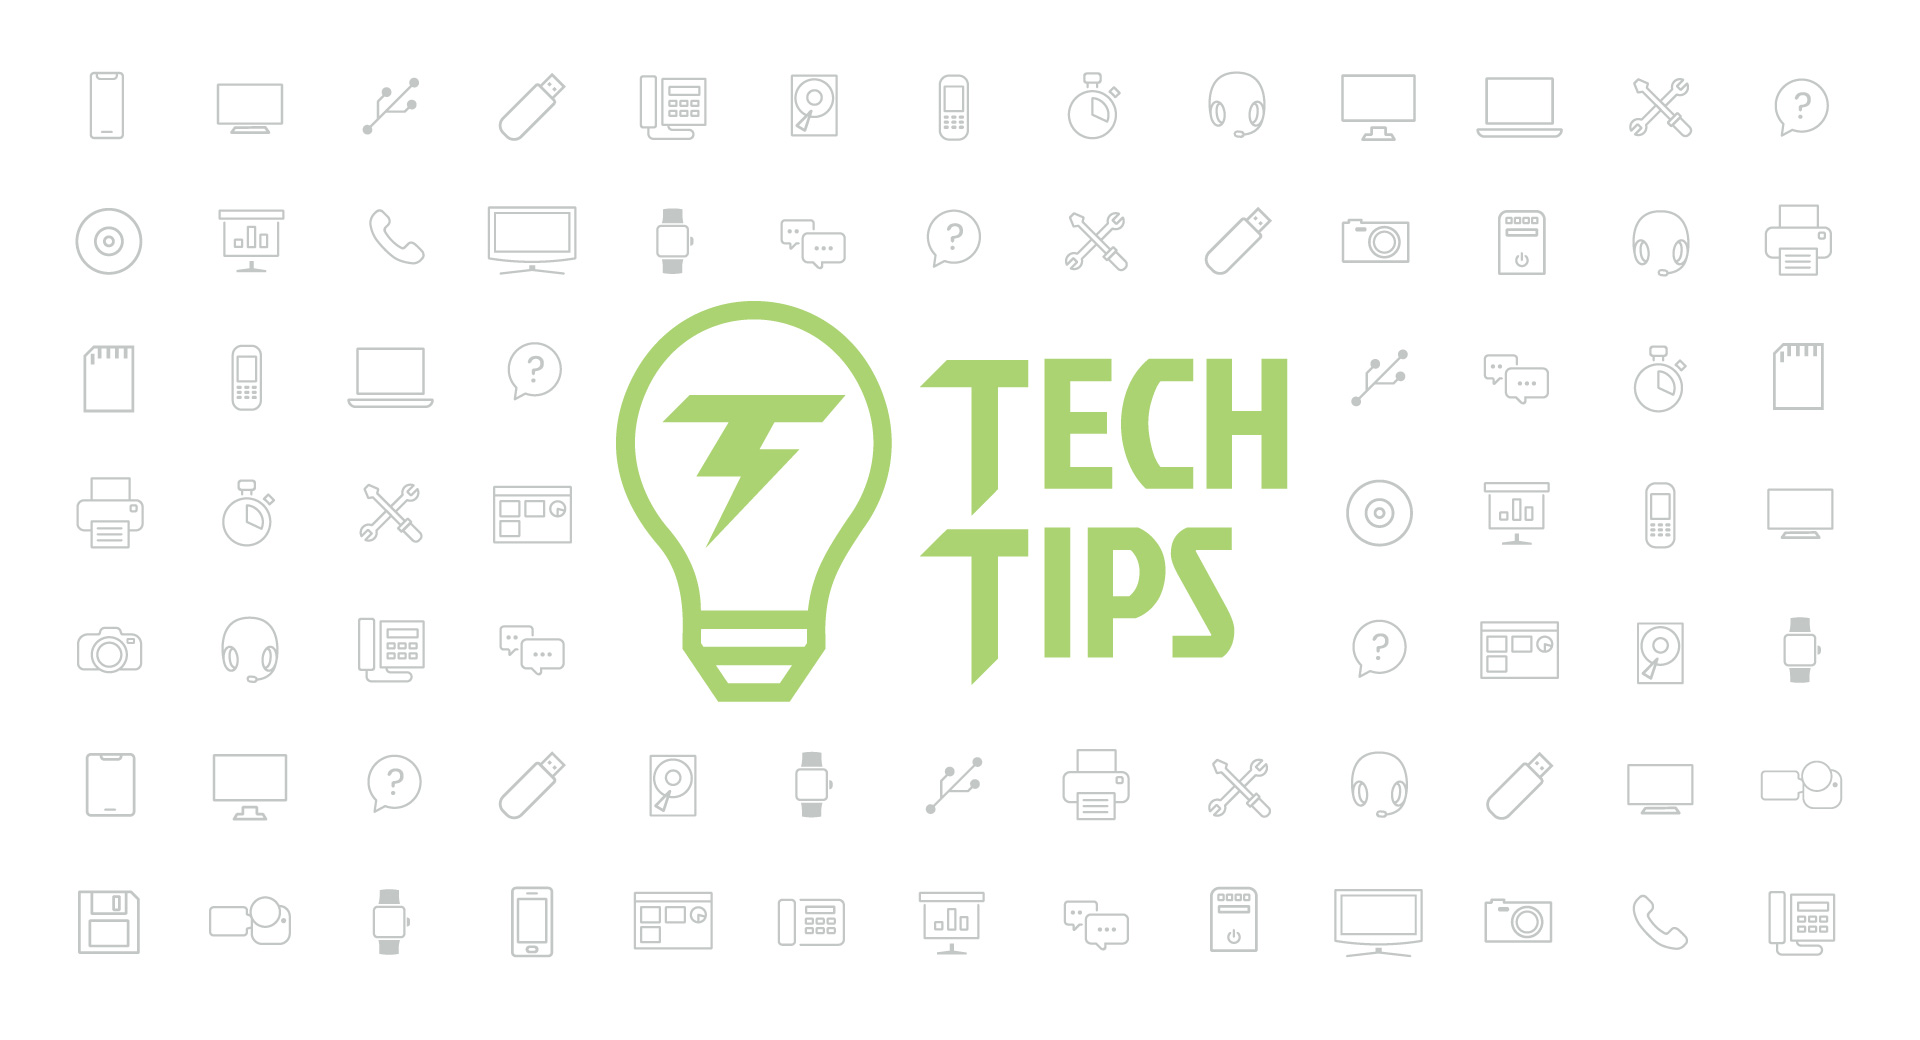 Technology Tips: May 2016 Edition